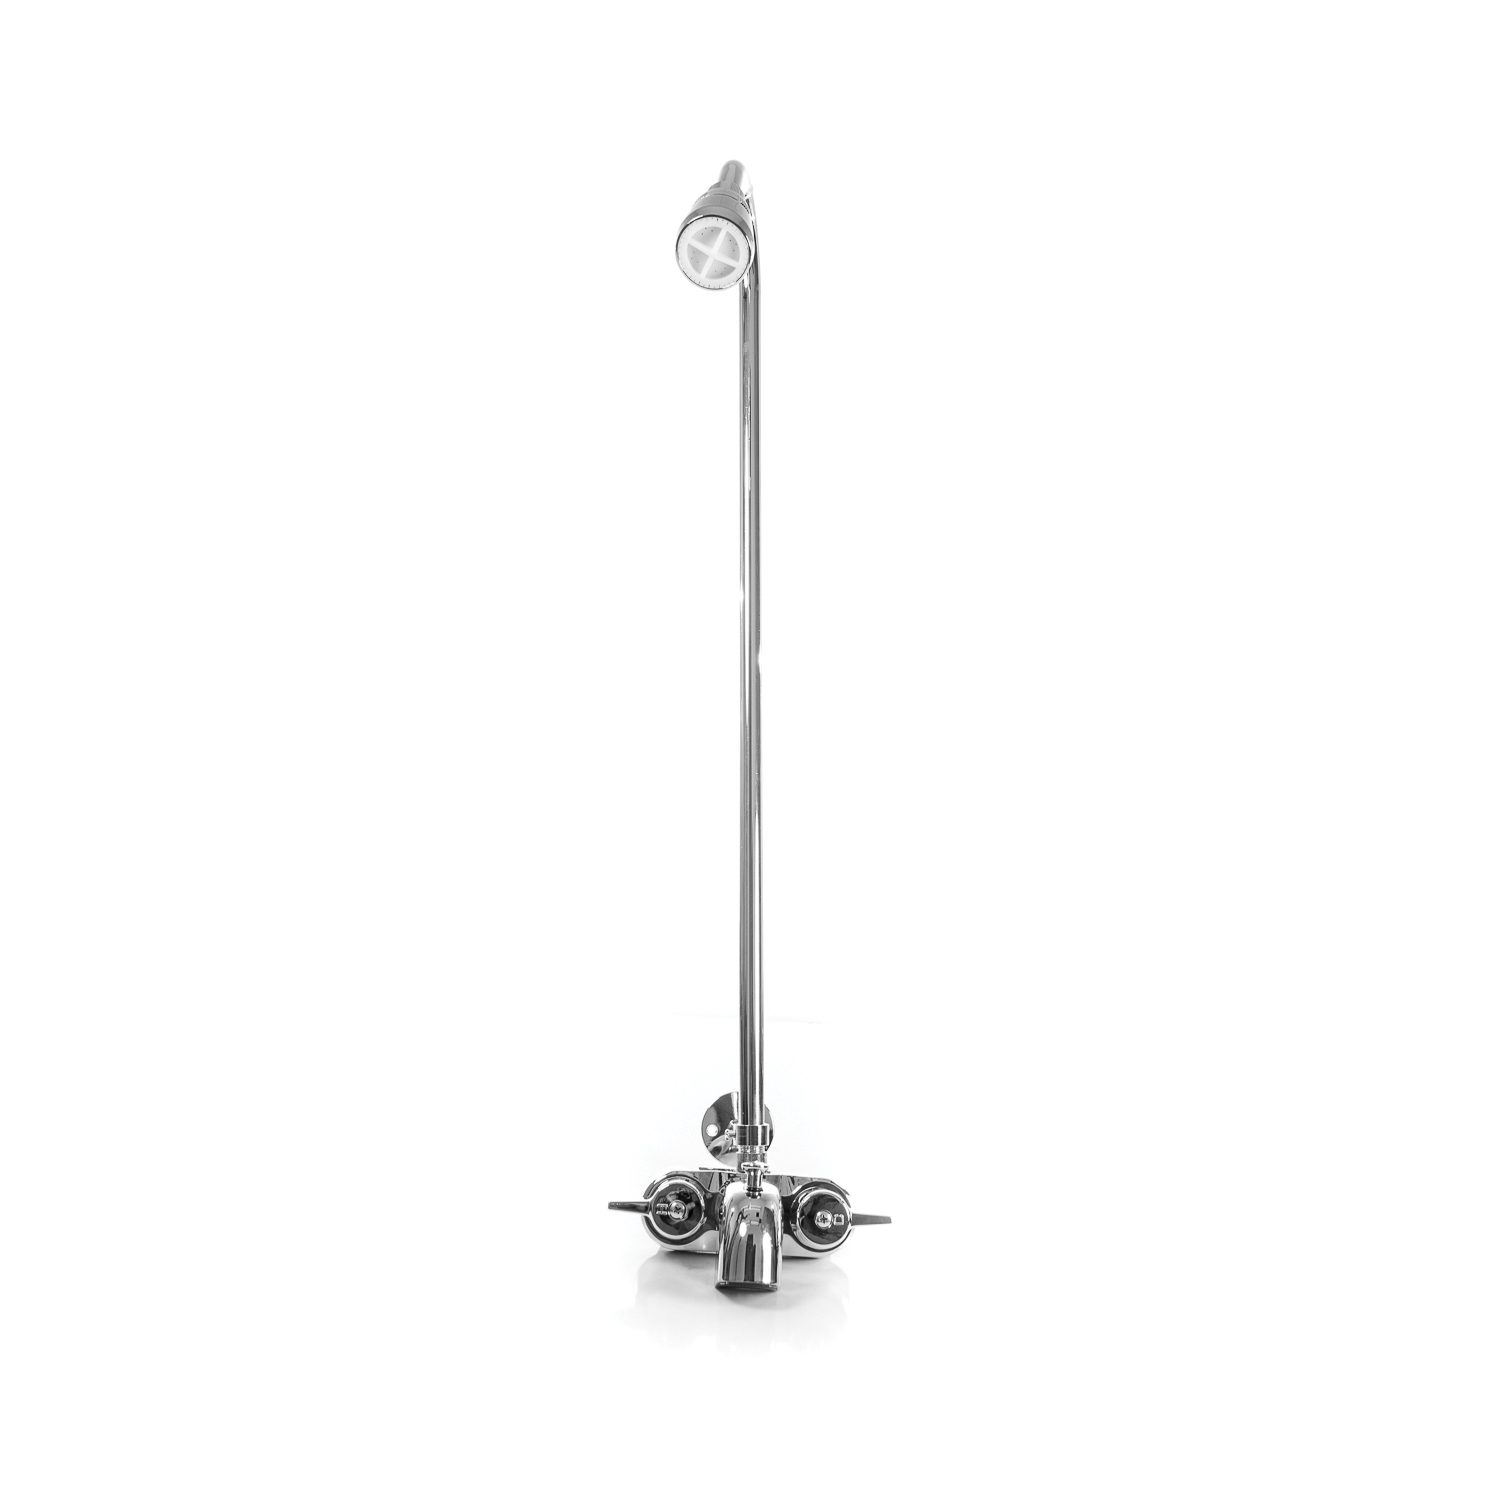 PASCO 2826 Regular Style Add-A-Shower With Brass Bath Cock, Polished Chrome